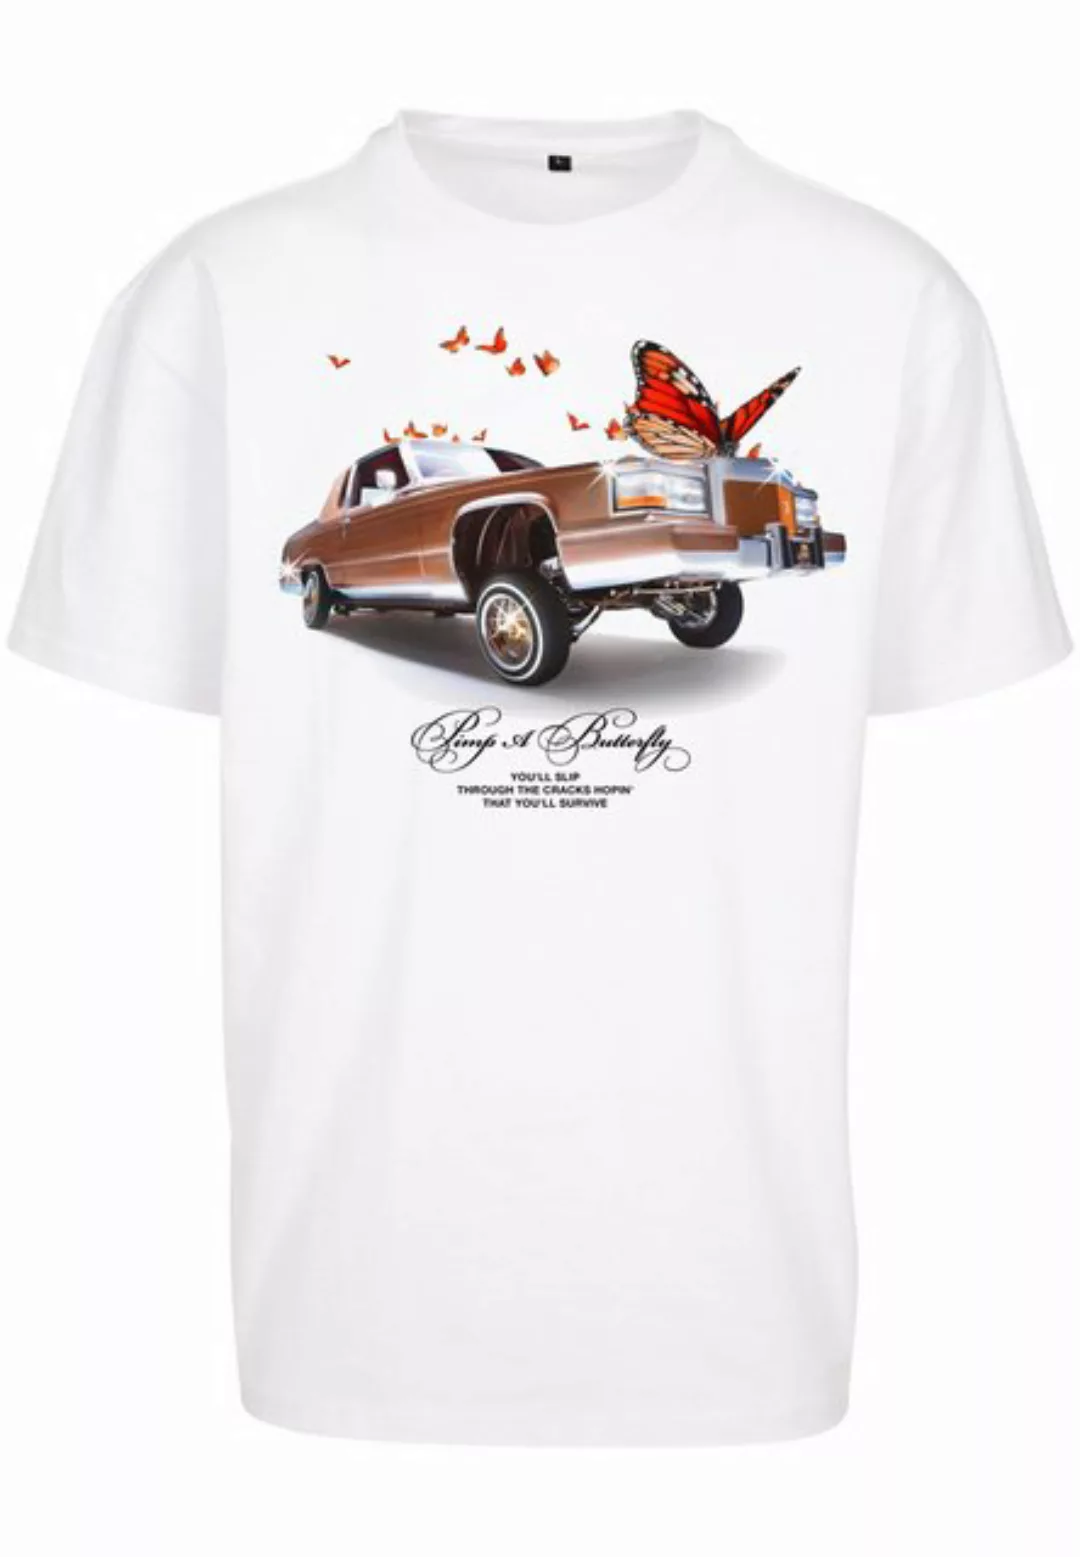 Upscale by Mister Tee T-Shirt Upscale by Mister Tee Unisex Pimp a Butterfly günstig online kaufen